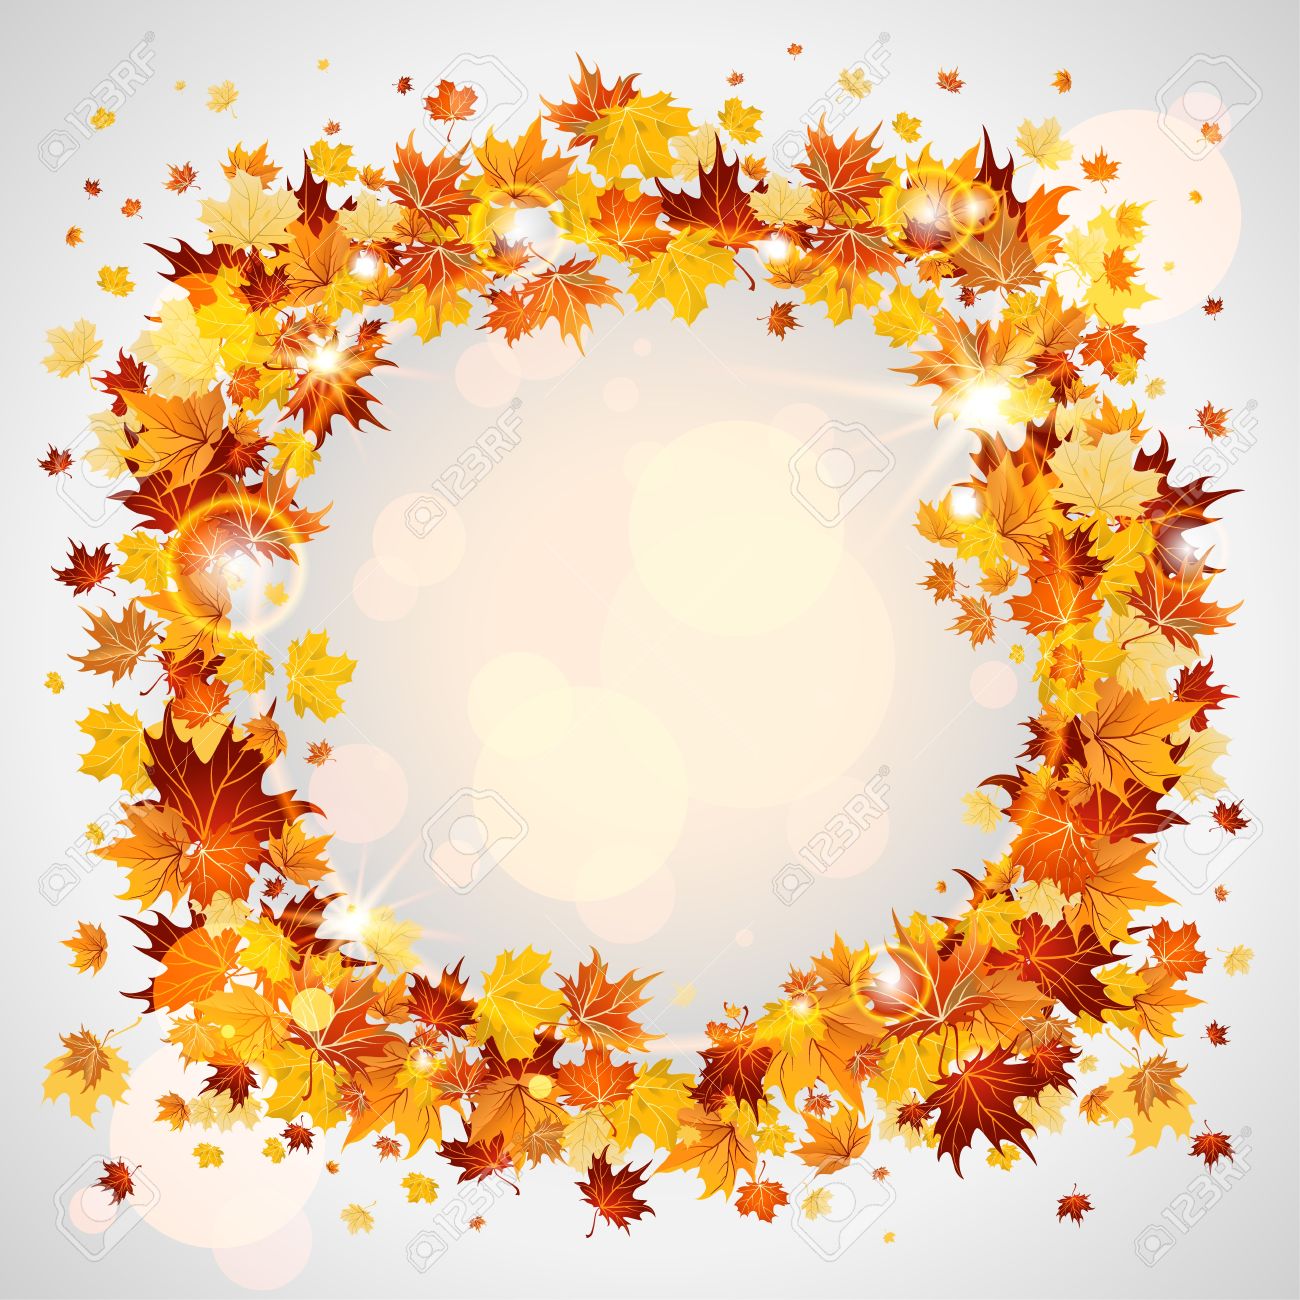 Free Fall Wreaths Cliparts, Download Free Clip Art, Free